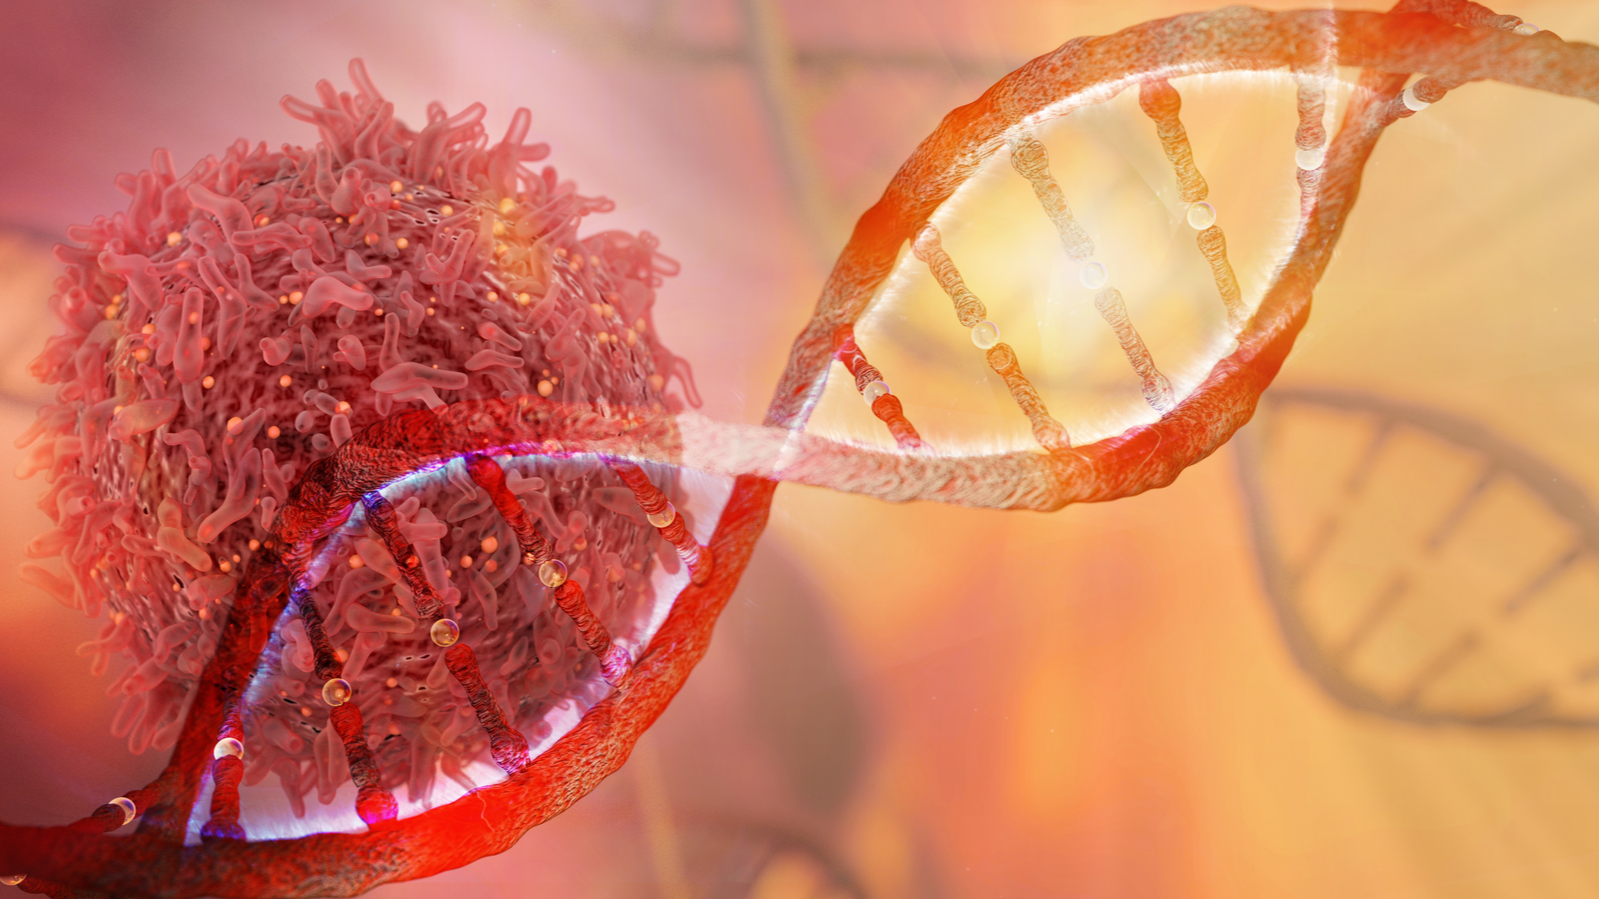 DNA strand and Cancer Cell Oncology Research Concept 3D rendering. SNGX Stock